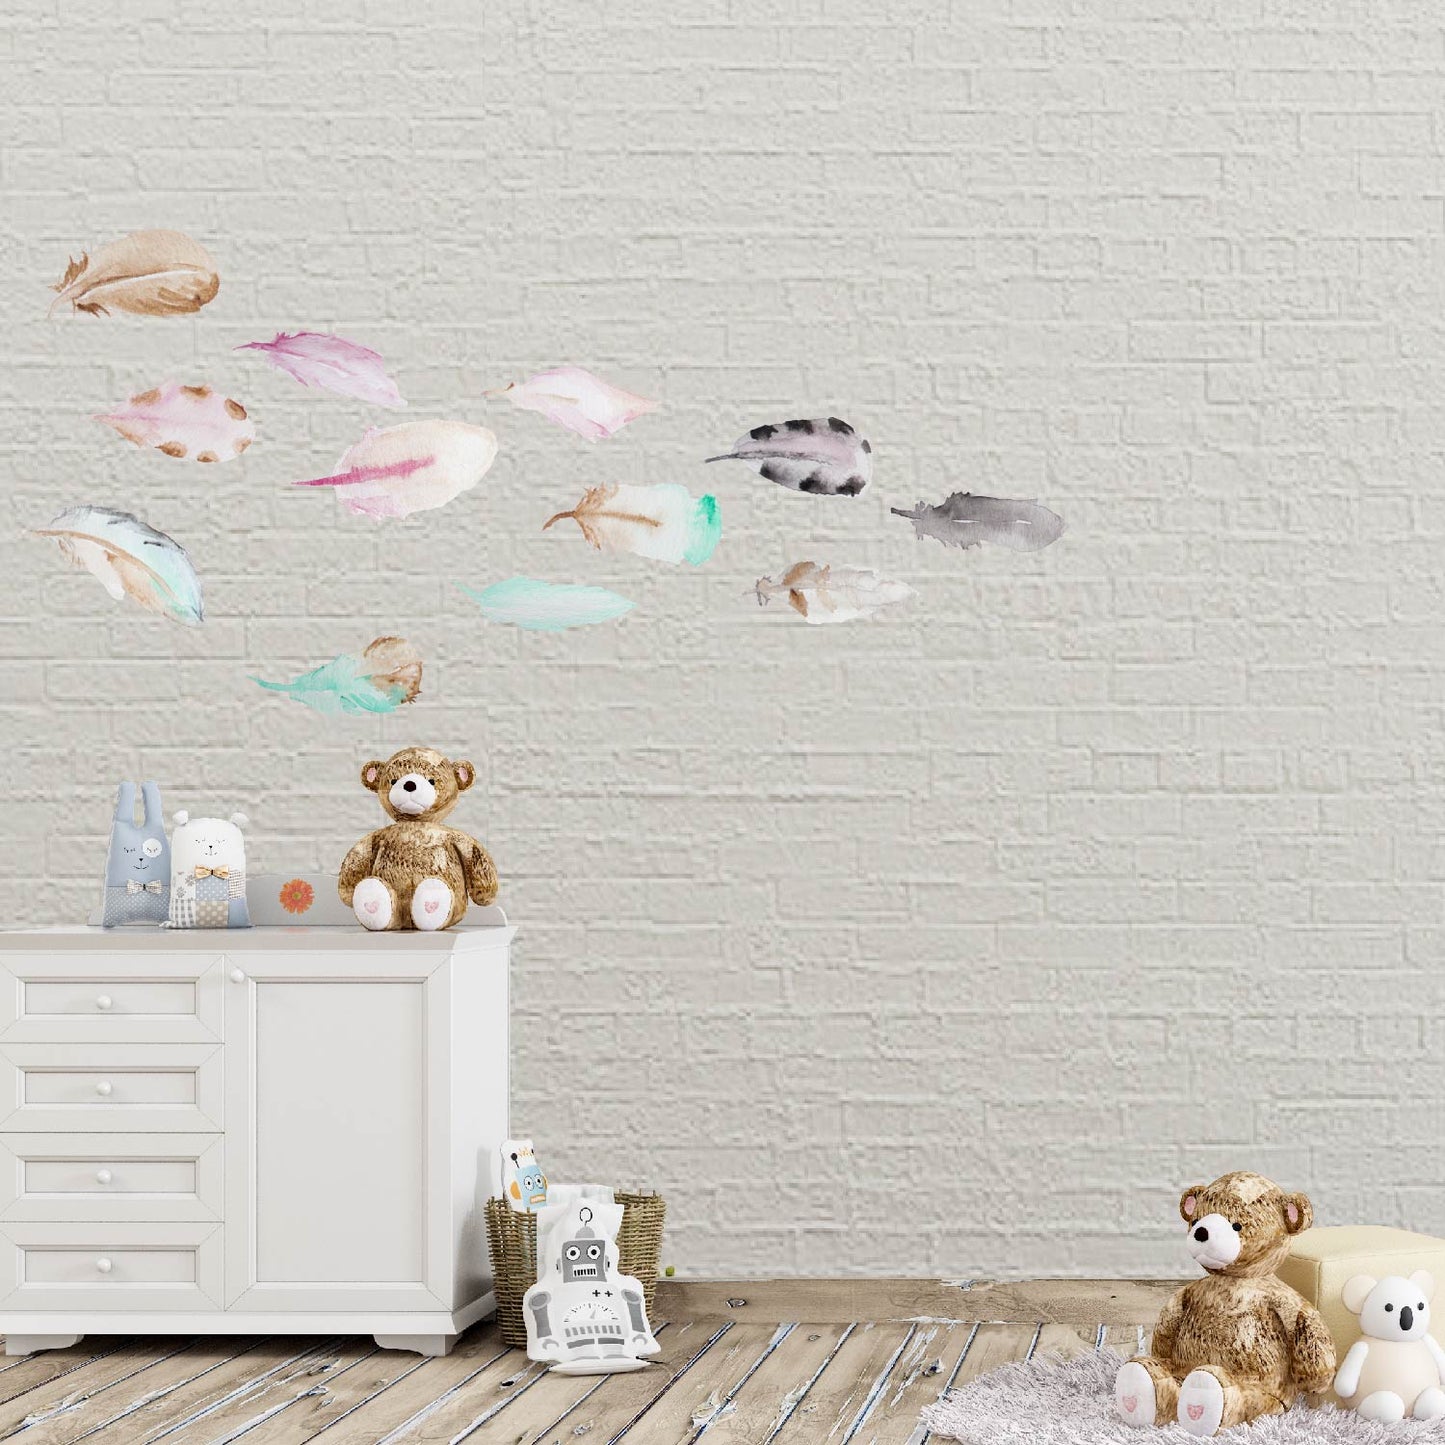 Watercolor Feathers - Peel and Stick Removable Wall Decals - Picture Perfect Decals